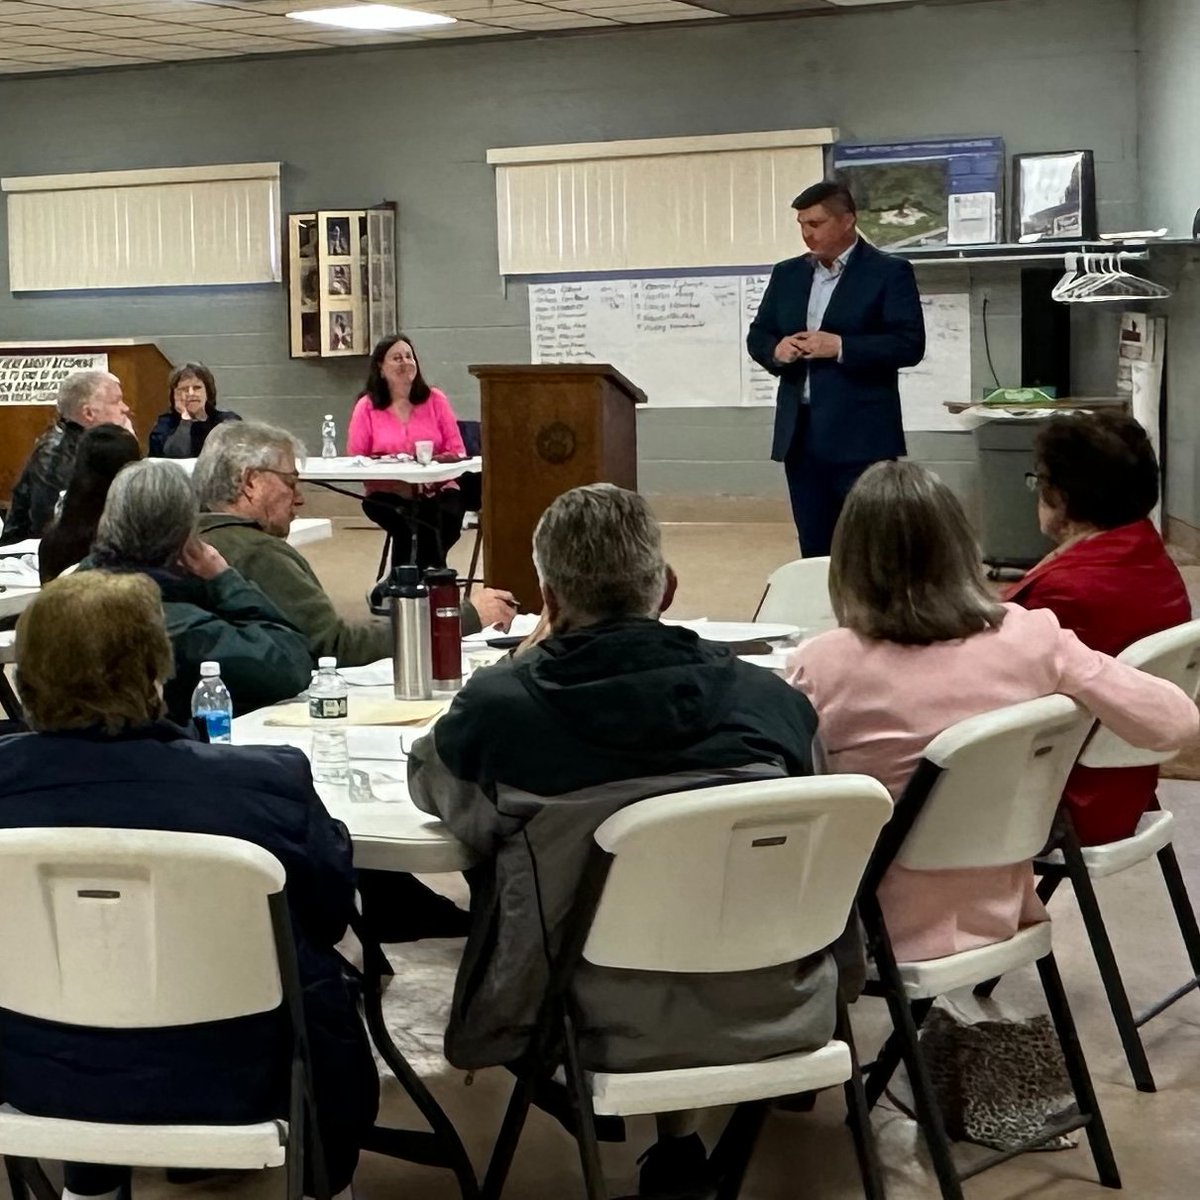 On the road across #MN01 today. Wonderful to visit with @BrownMNGOP, @OlmstedGOP, @NicolletMNGOP, and Blue Earth County Republicans.